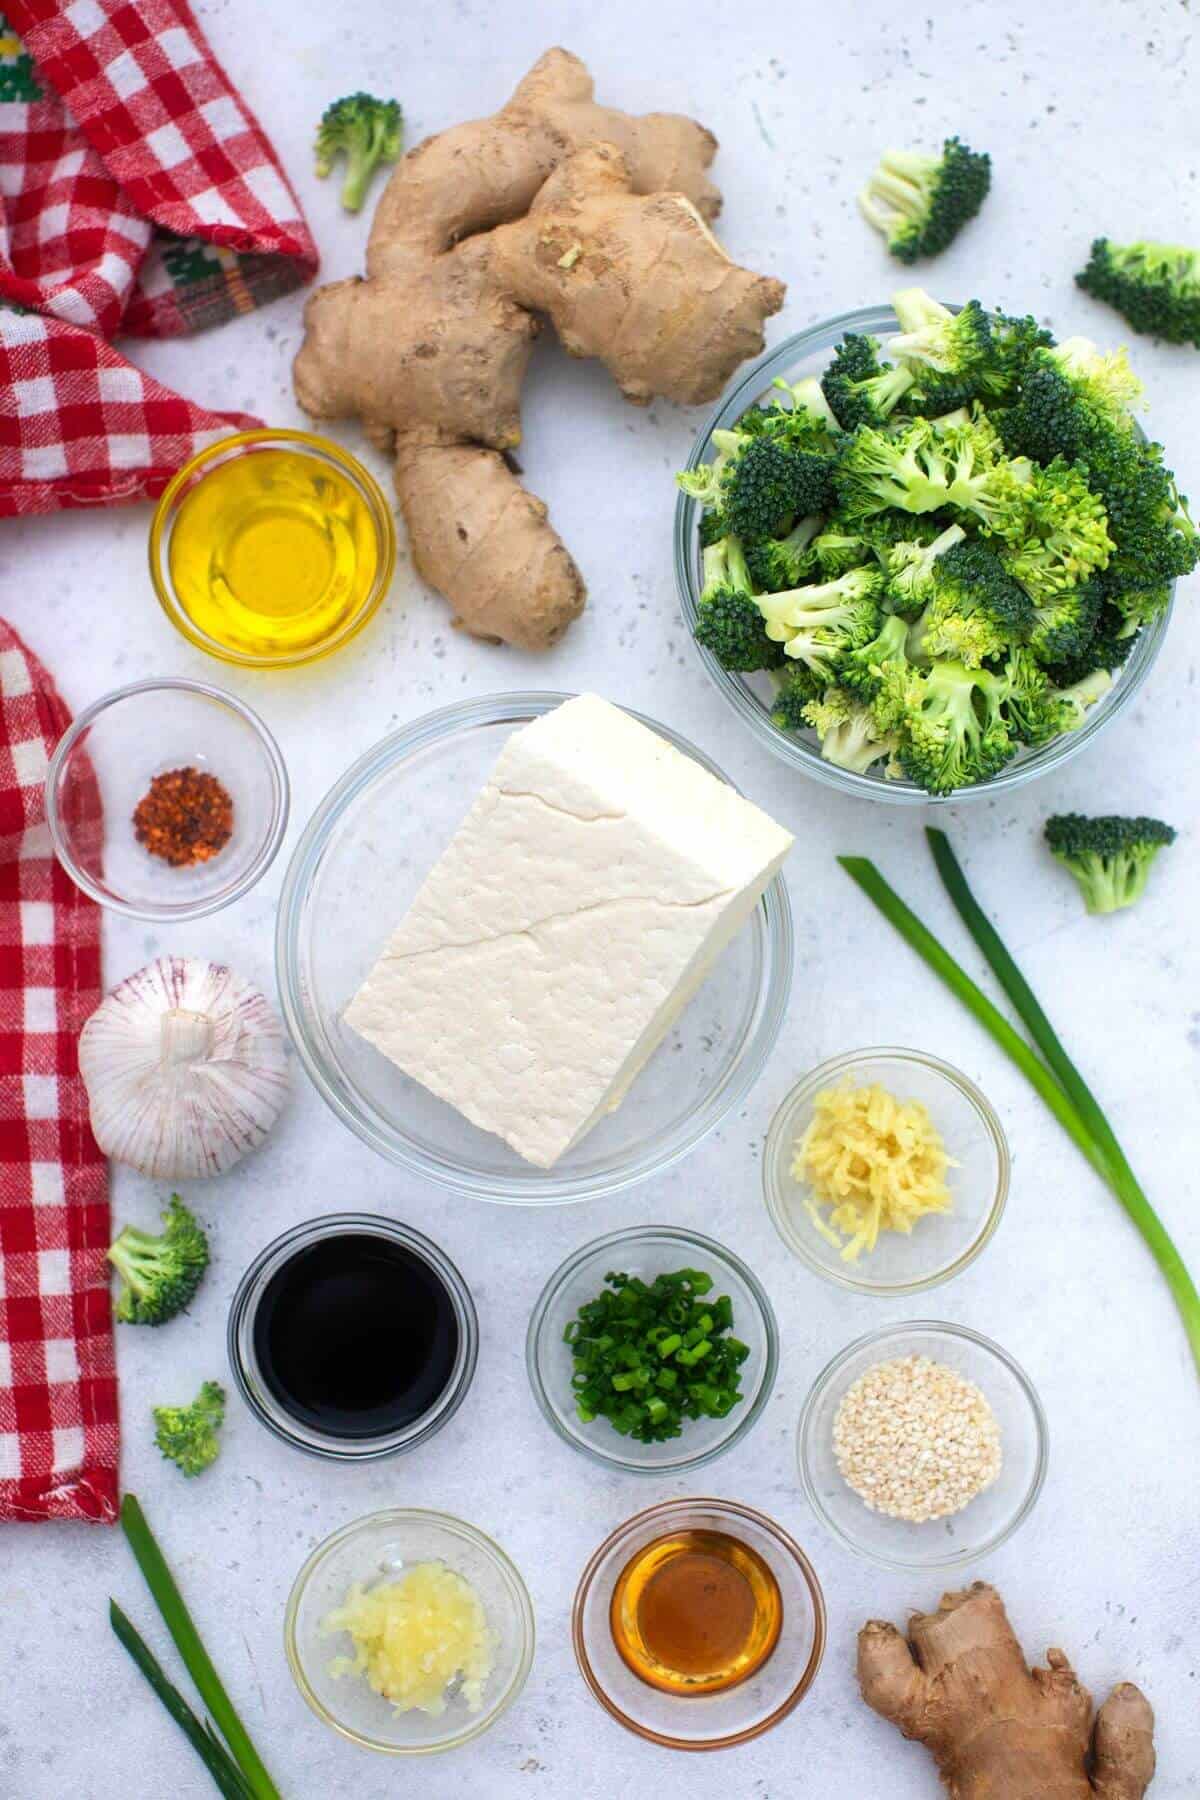 Ingredients for a broccoli and tofu dish.